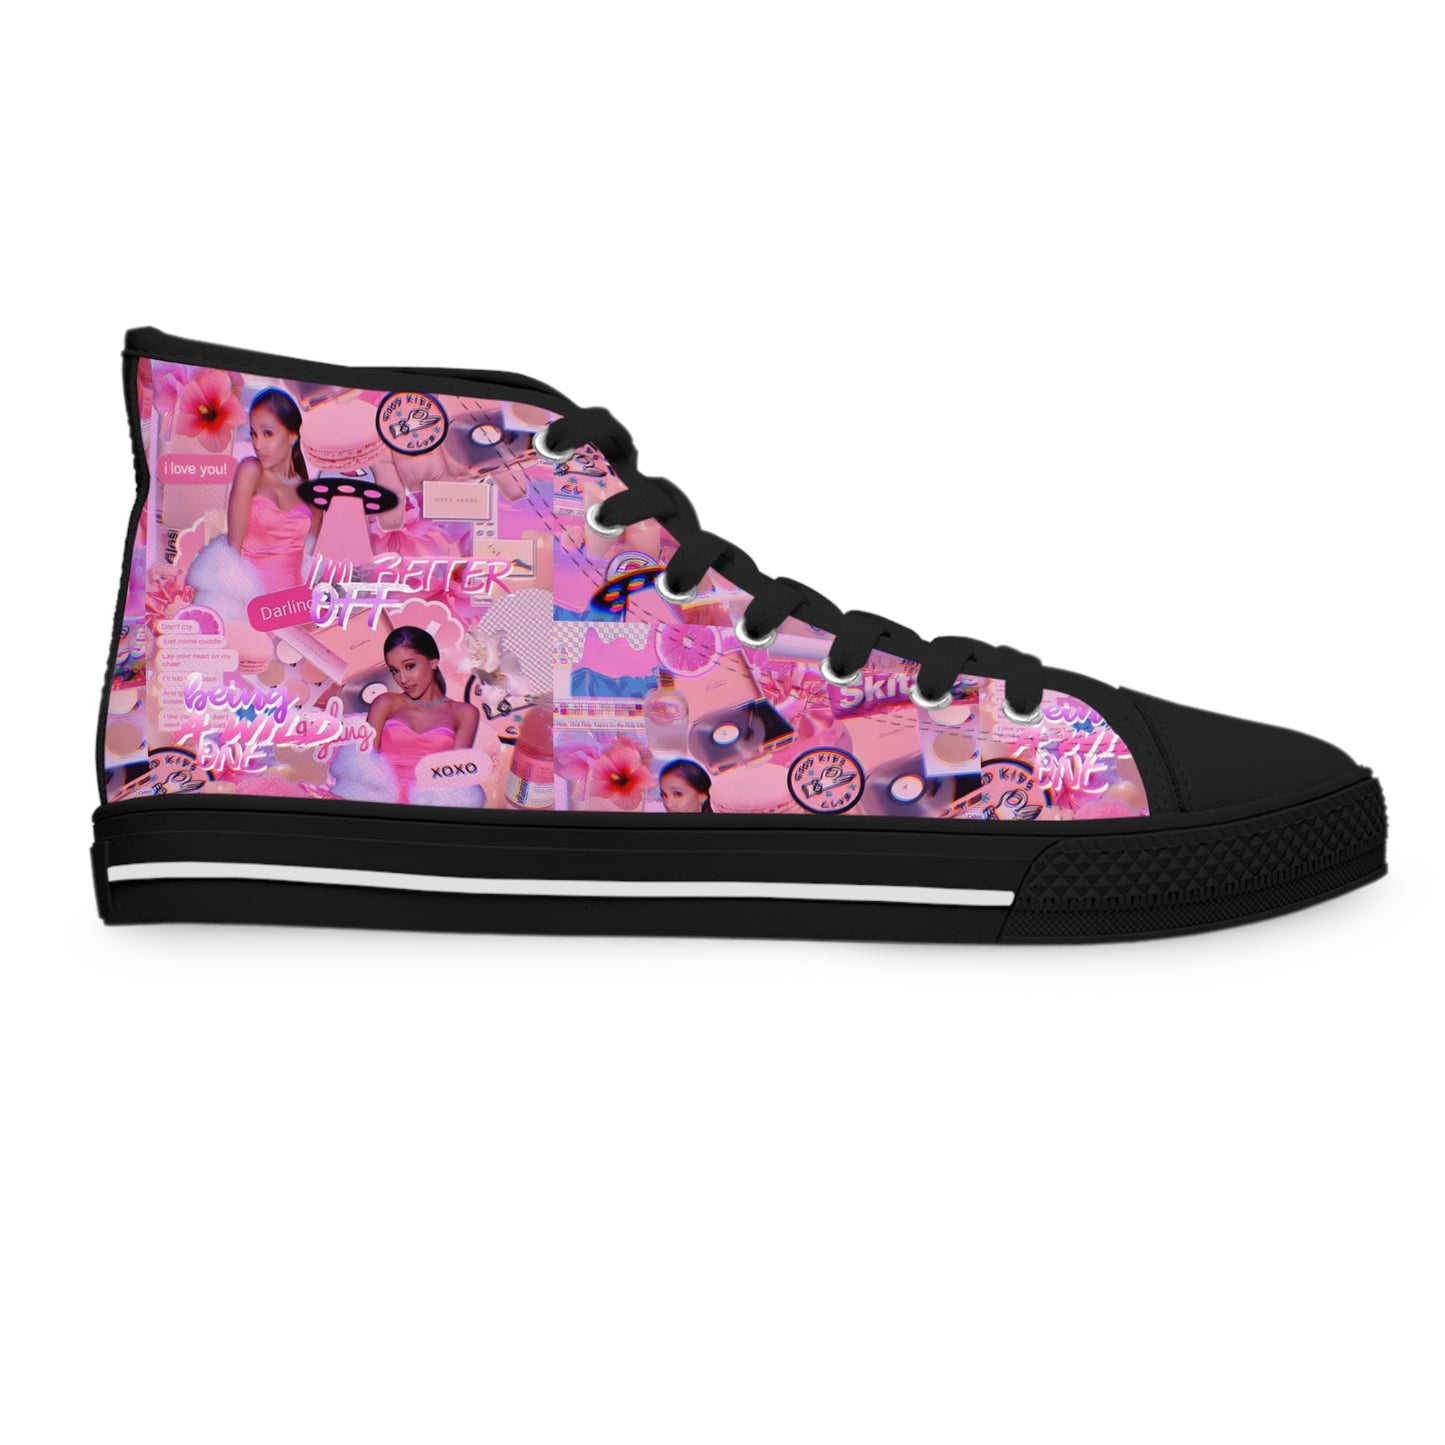 Ariana Grande Purple Vibes Collage Women's High Top Sneakers